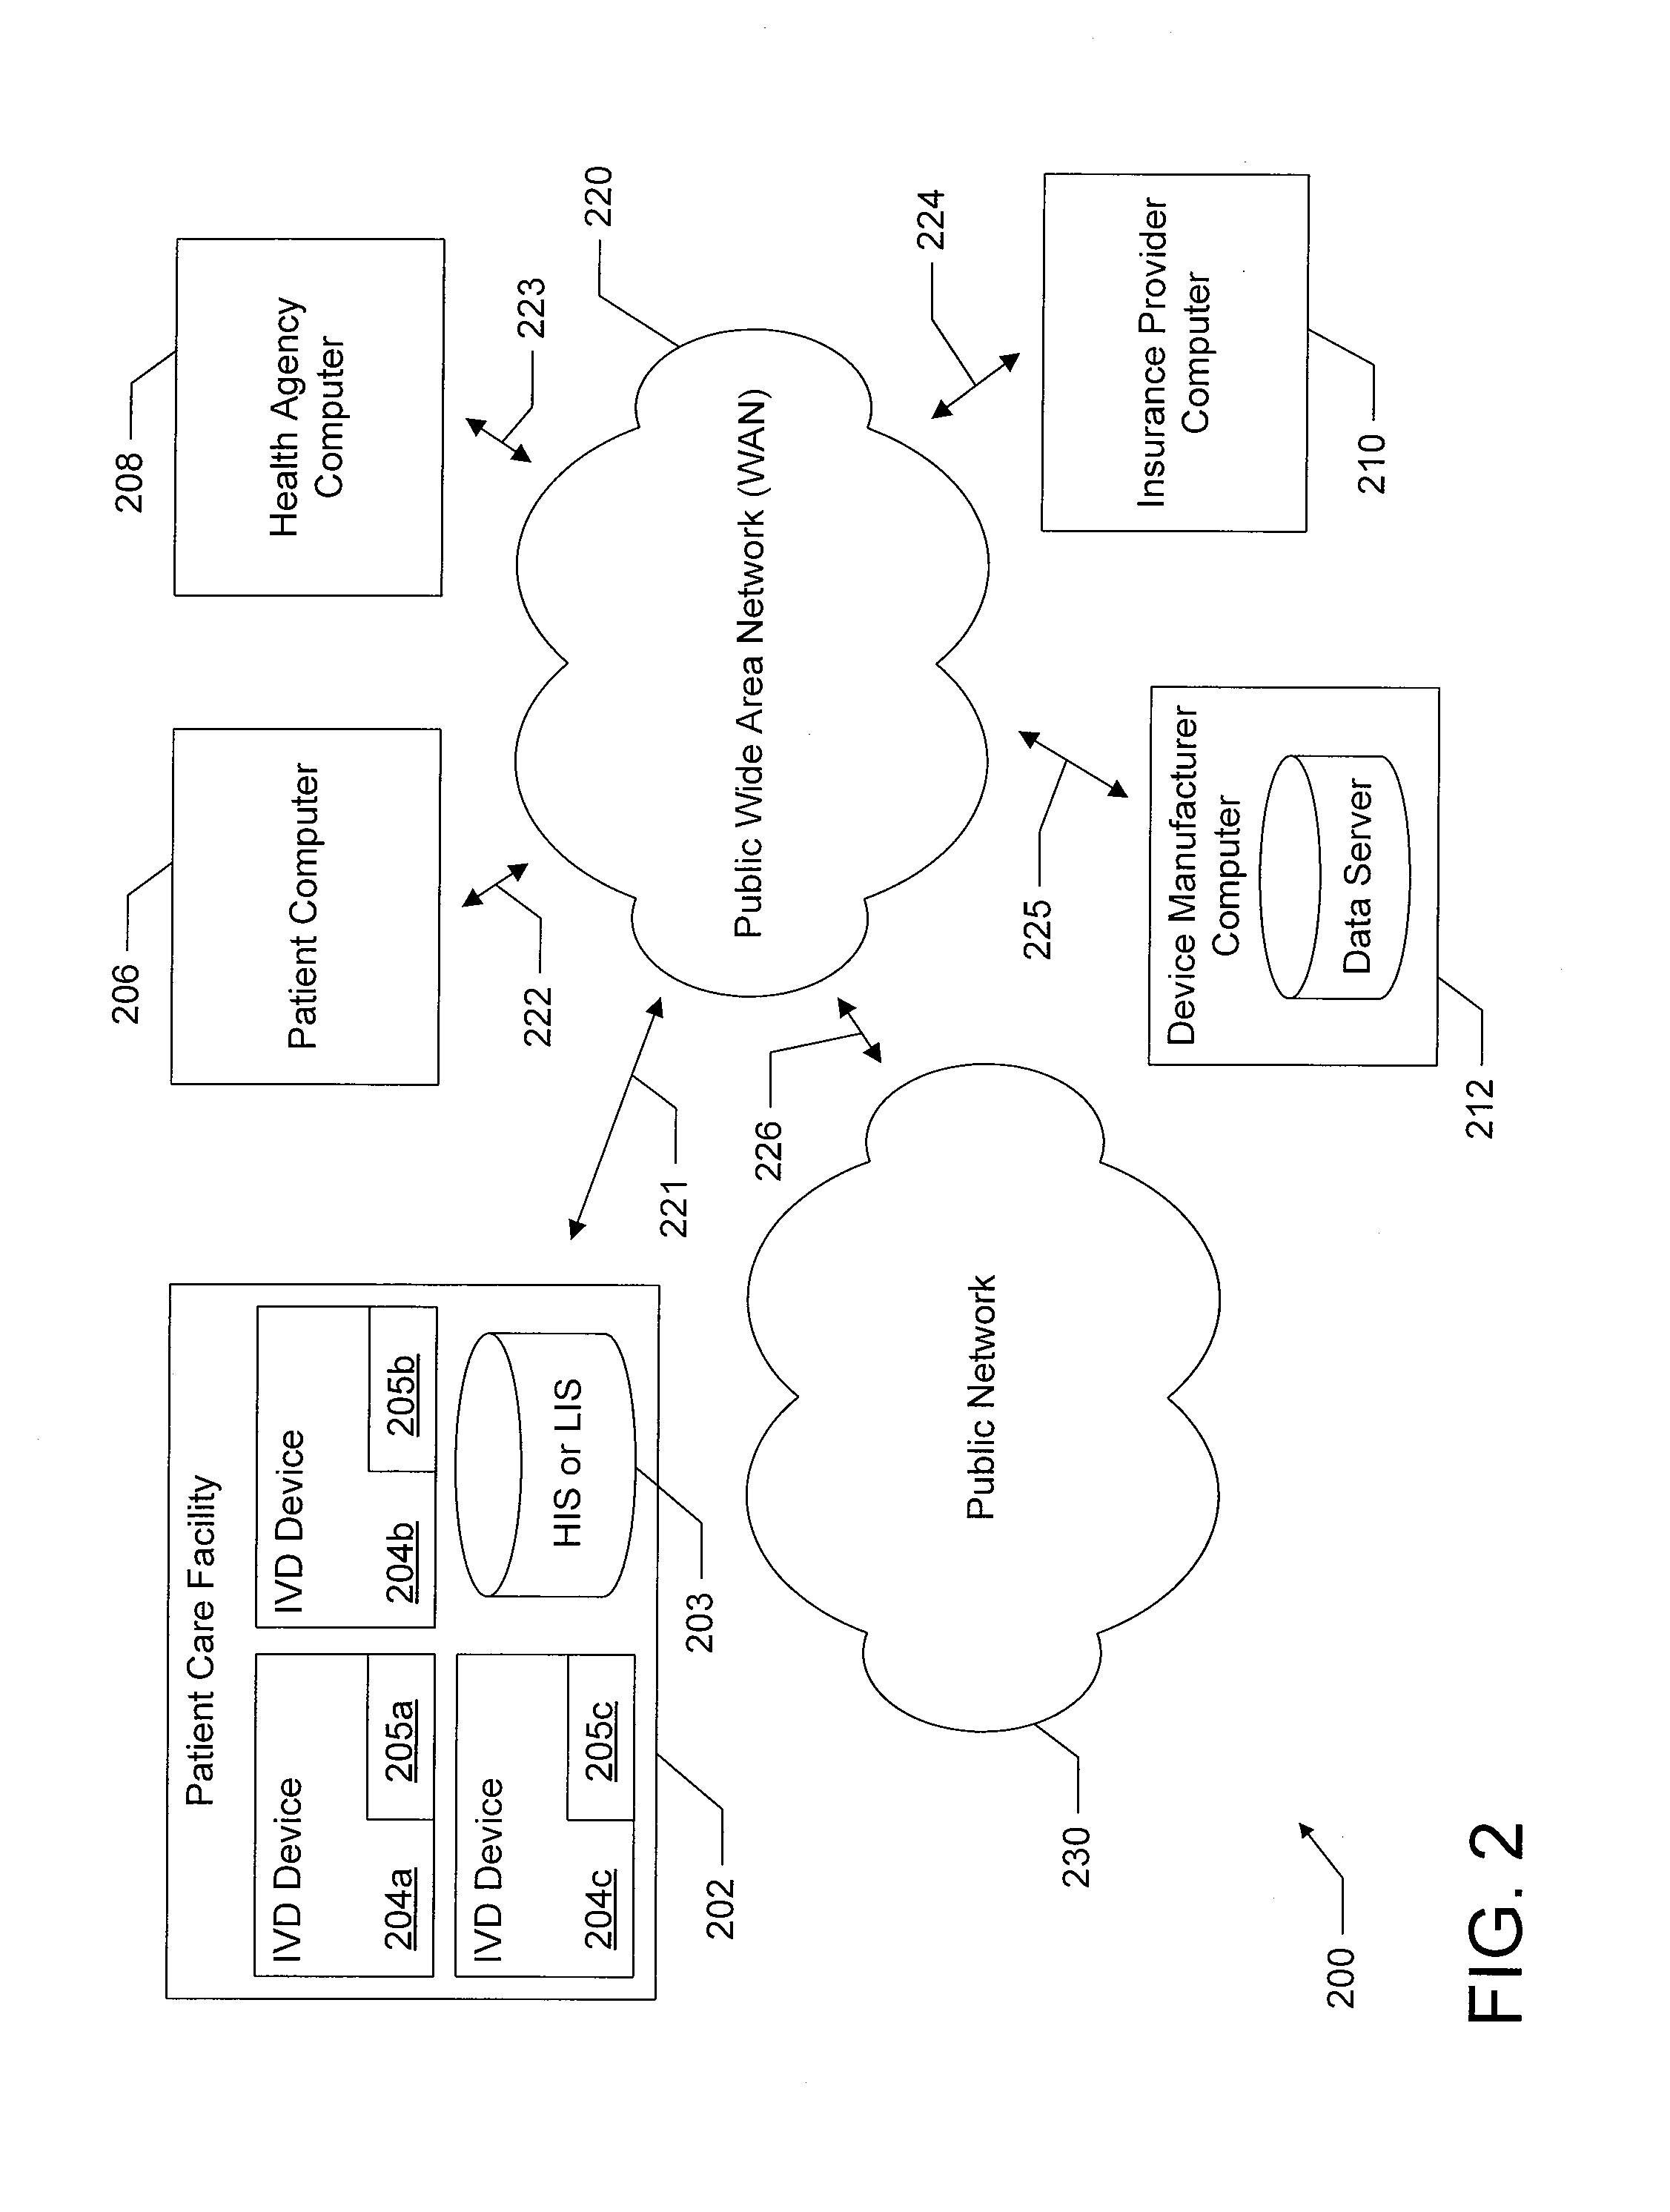 Distributed network of in-vitro diagnostic devices